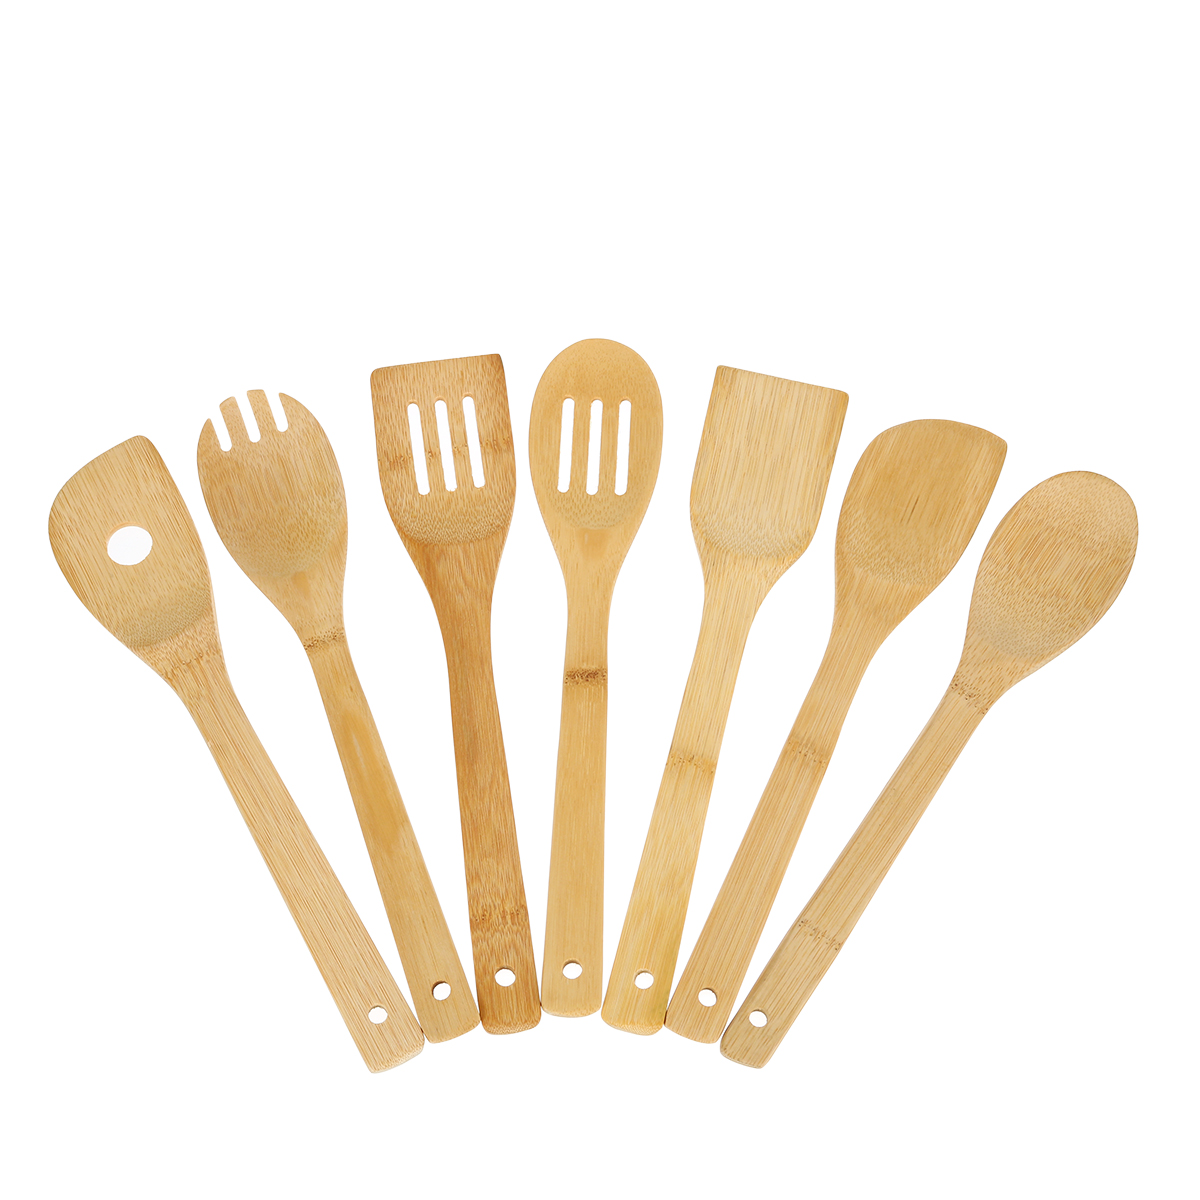 8PCS-Bamboo-Nonstick-Cooking-Utensils-Wooden-Spoons-and-Spatula-Utensil-Set-1680404-6